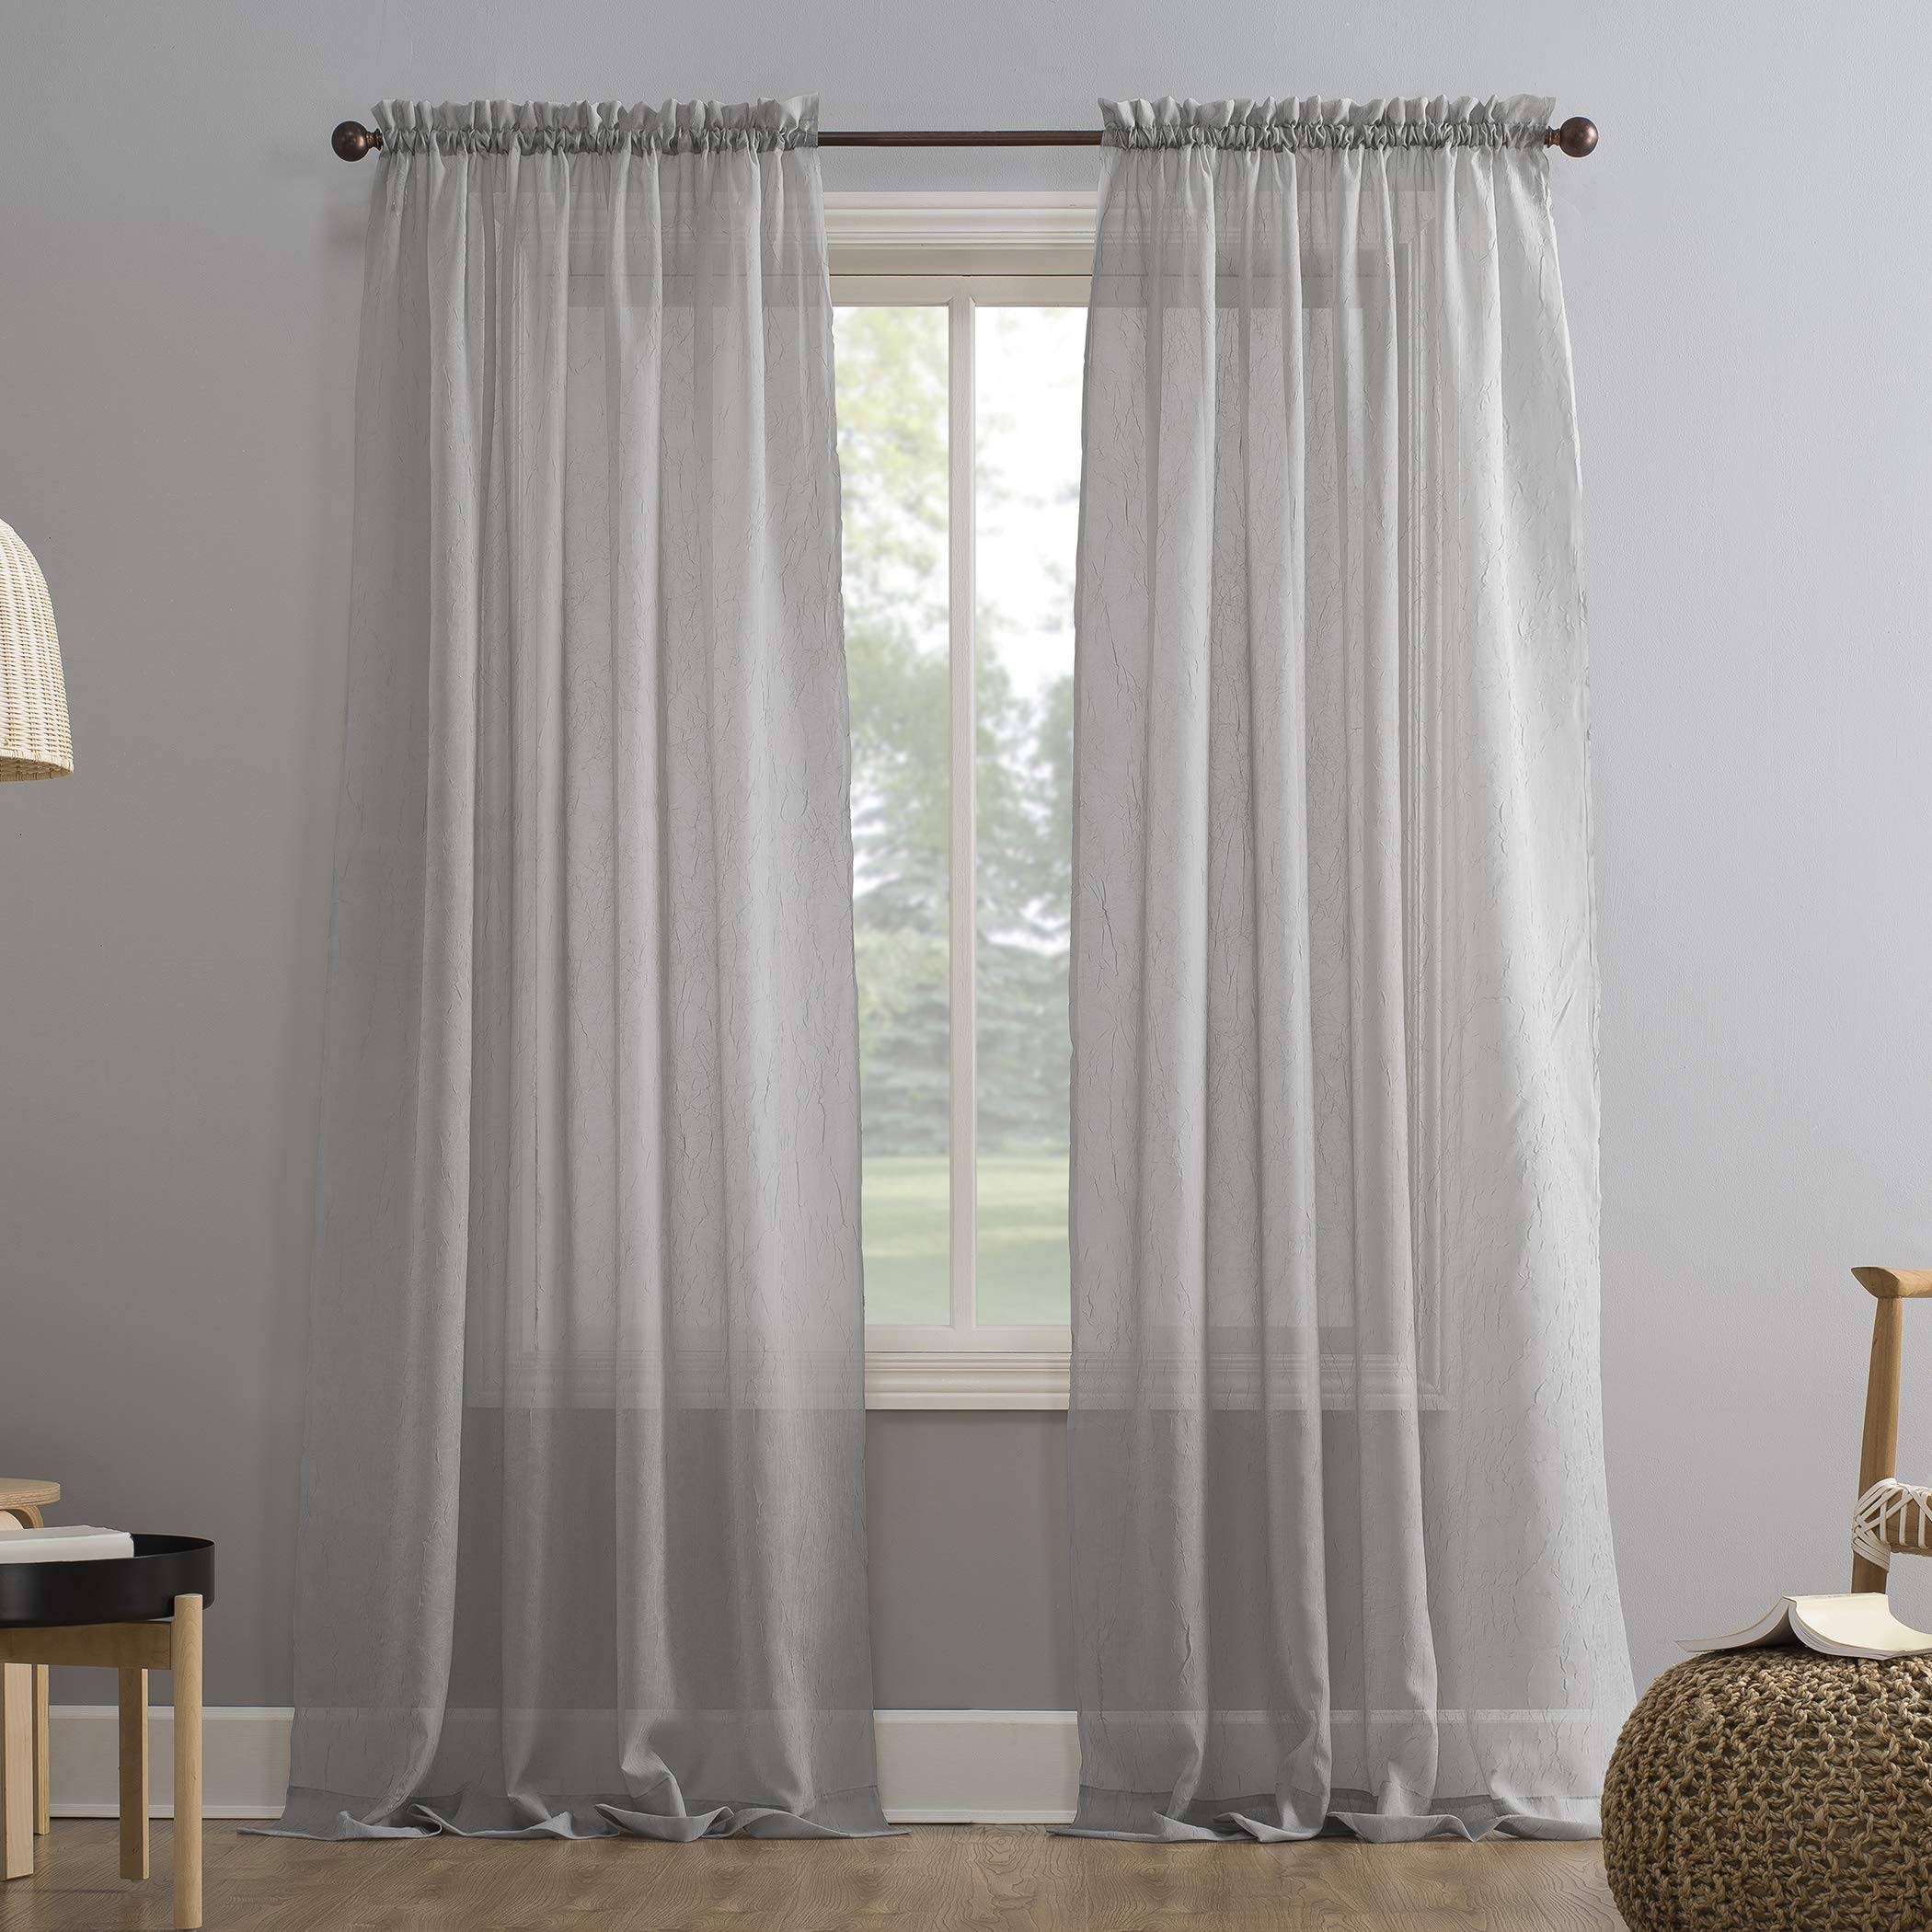 No. 918 Erica Sheer Crushed Voile Single Curtain Panel, Single Panel - 51 x 84 - Silver